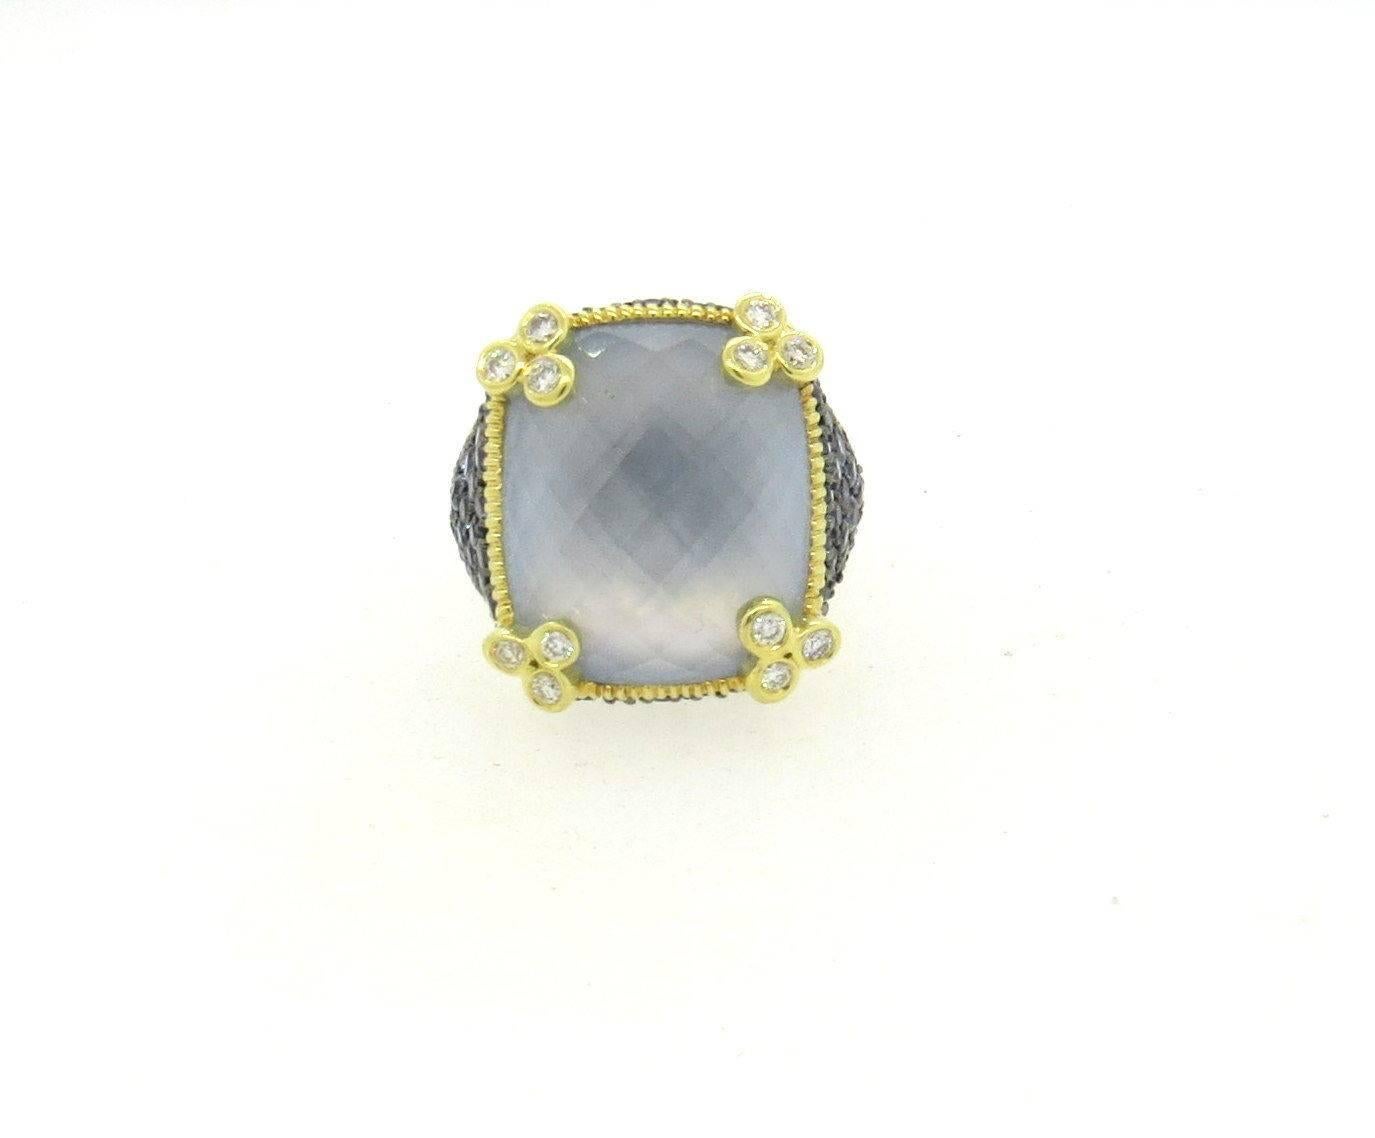 18k yellow gold ring set with blue gemstones, blue topaz - 17mm x 15mm, and approximately 0.64ctw of H/VS diamonds.  Crafted by Judith Ripka, the ring size 5 1/2 (sizing balls can be removed to increase size) top of the ring - 19mm x 17mm.  Marked: